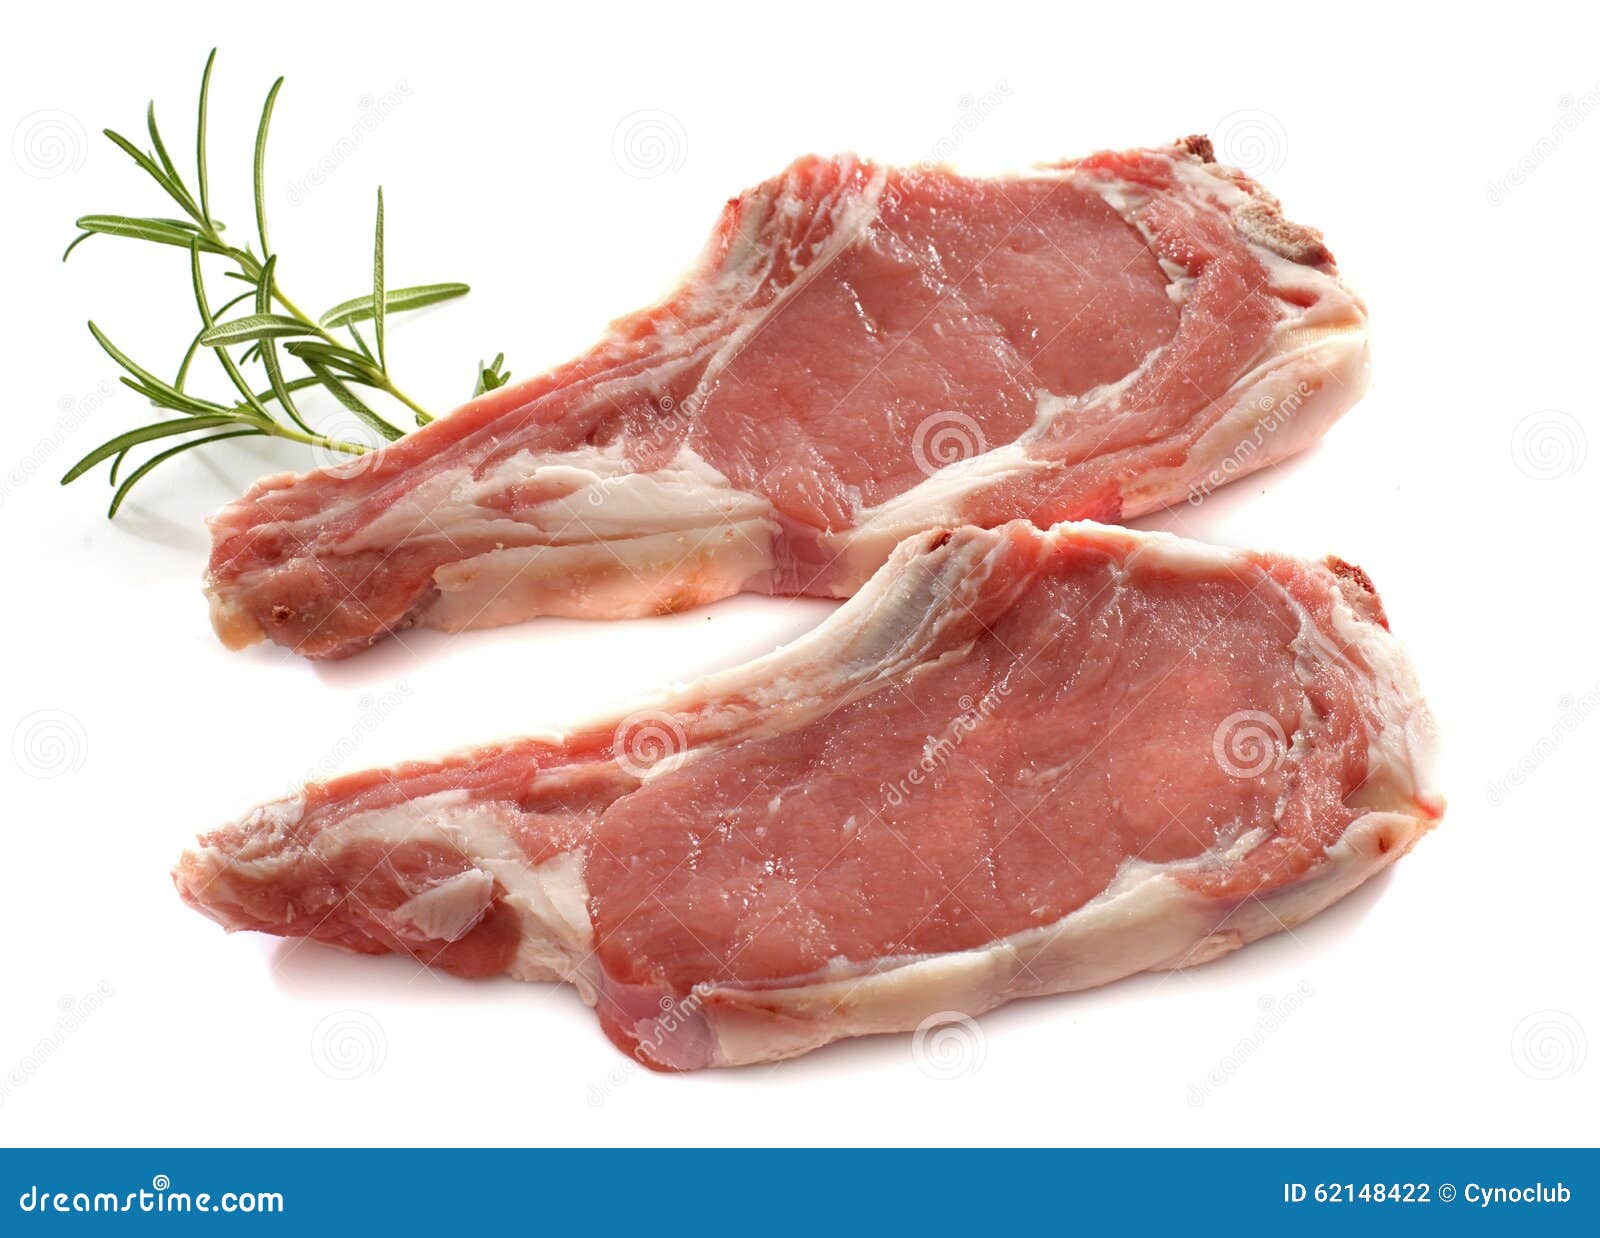 veal meat chop